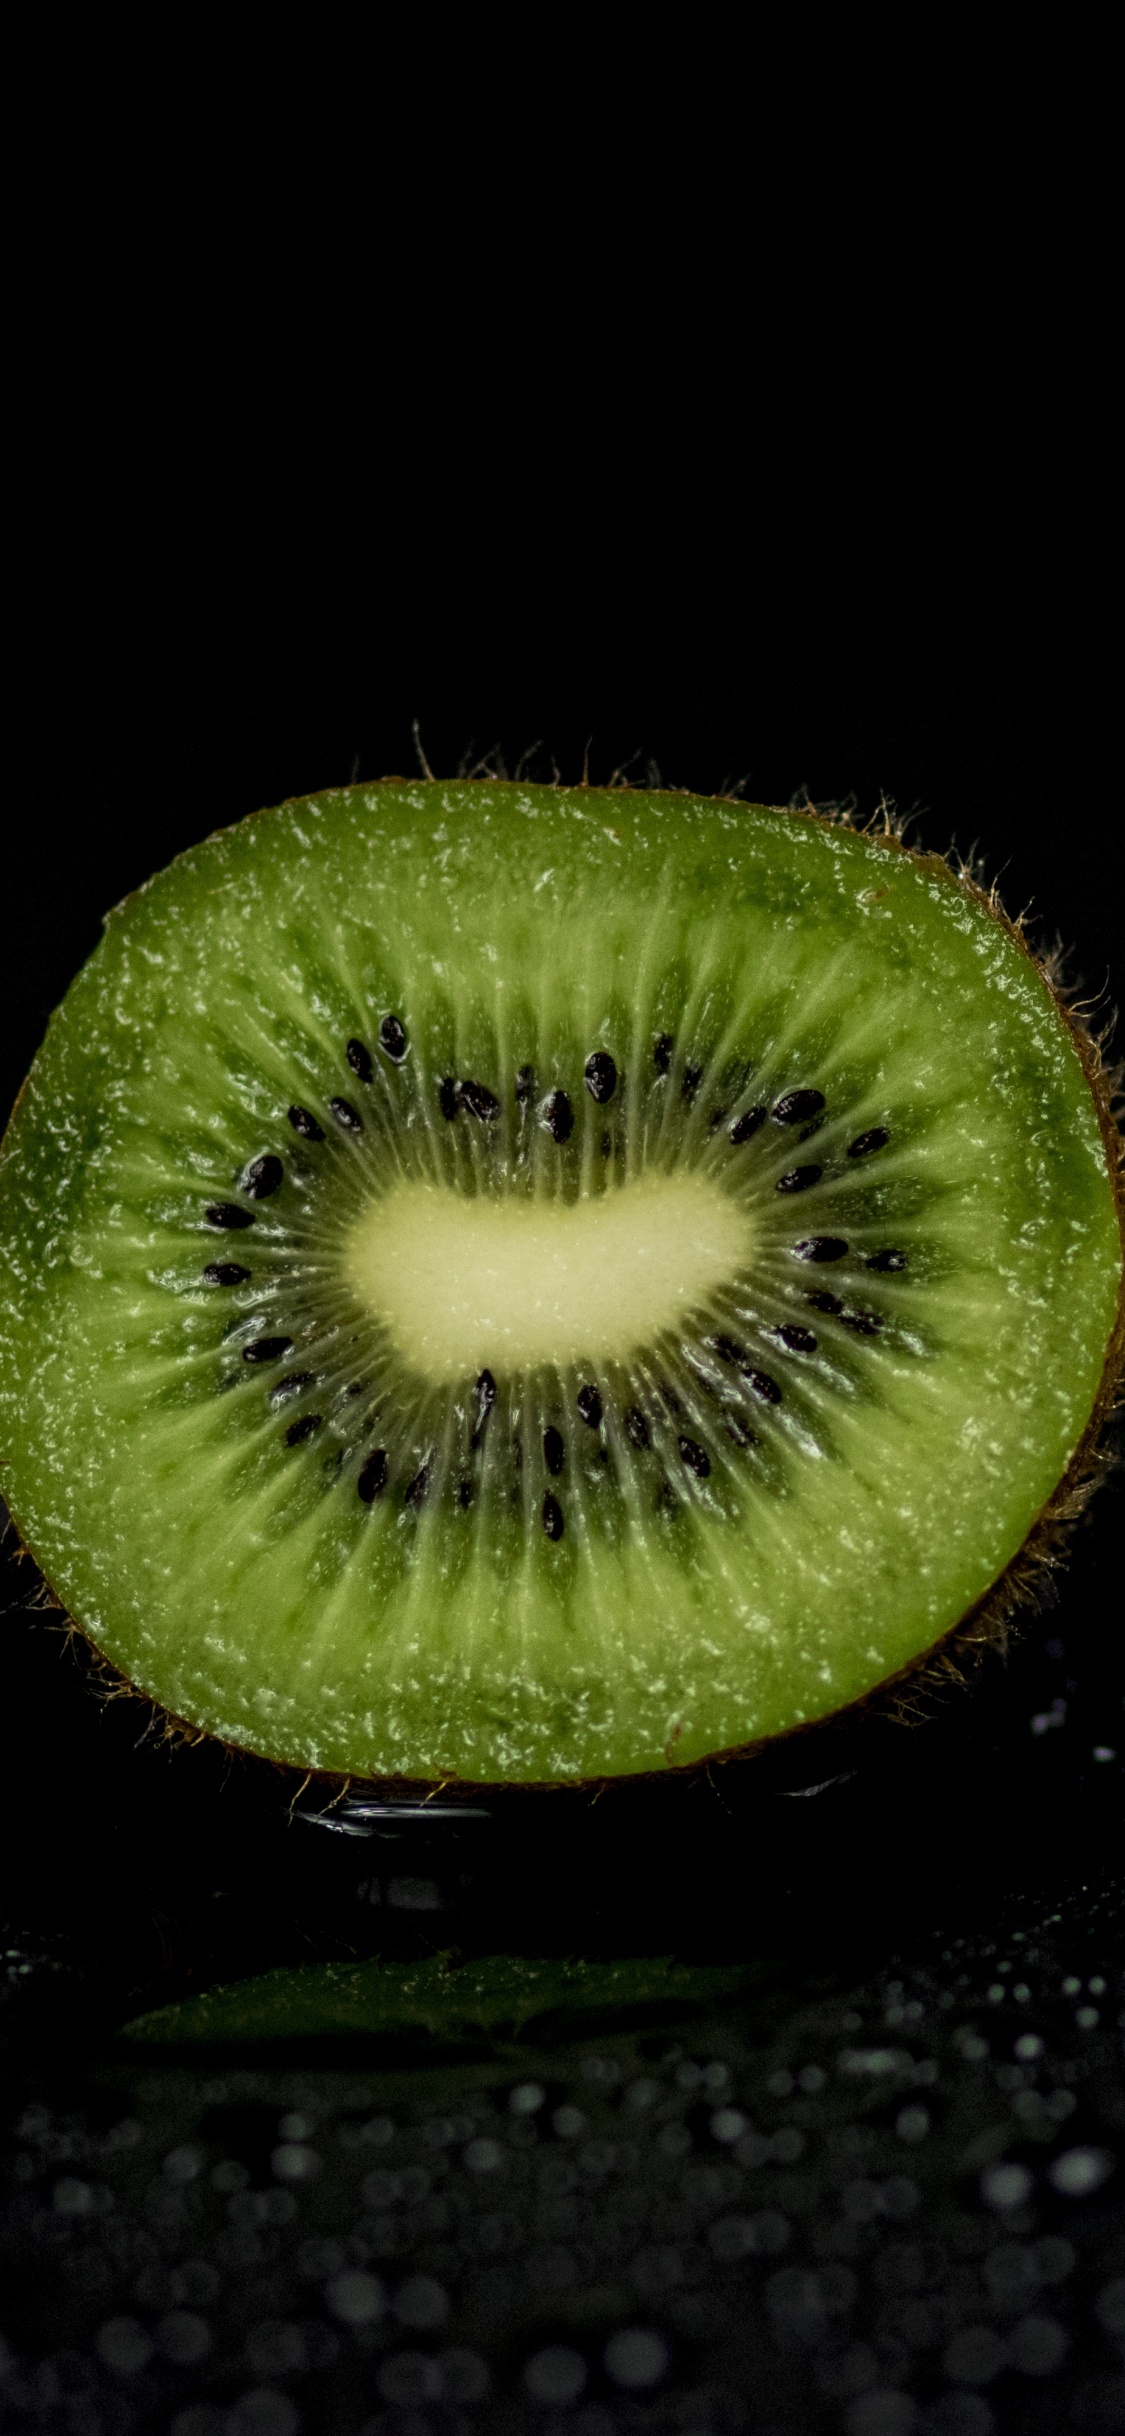 Green Round Fruit on Black Surface. Wallpaper in 1125x2436 Resolution